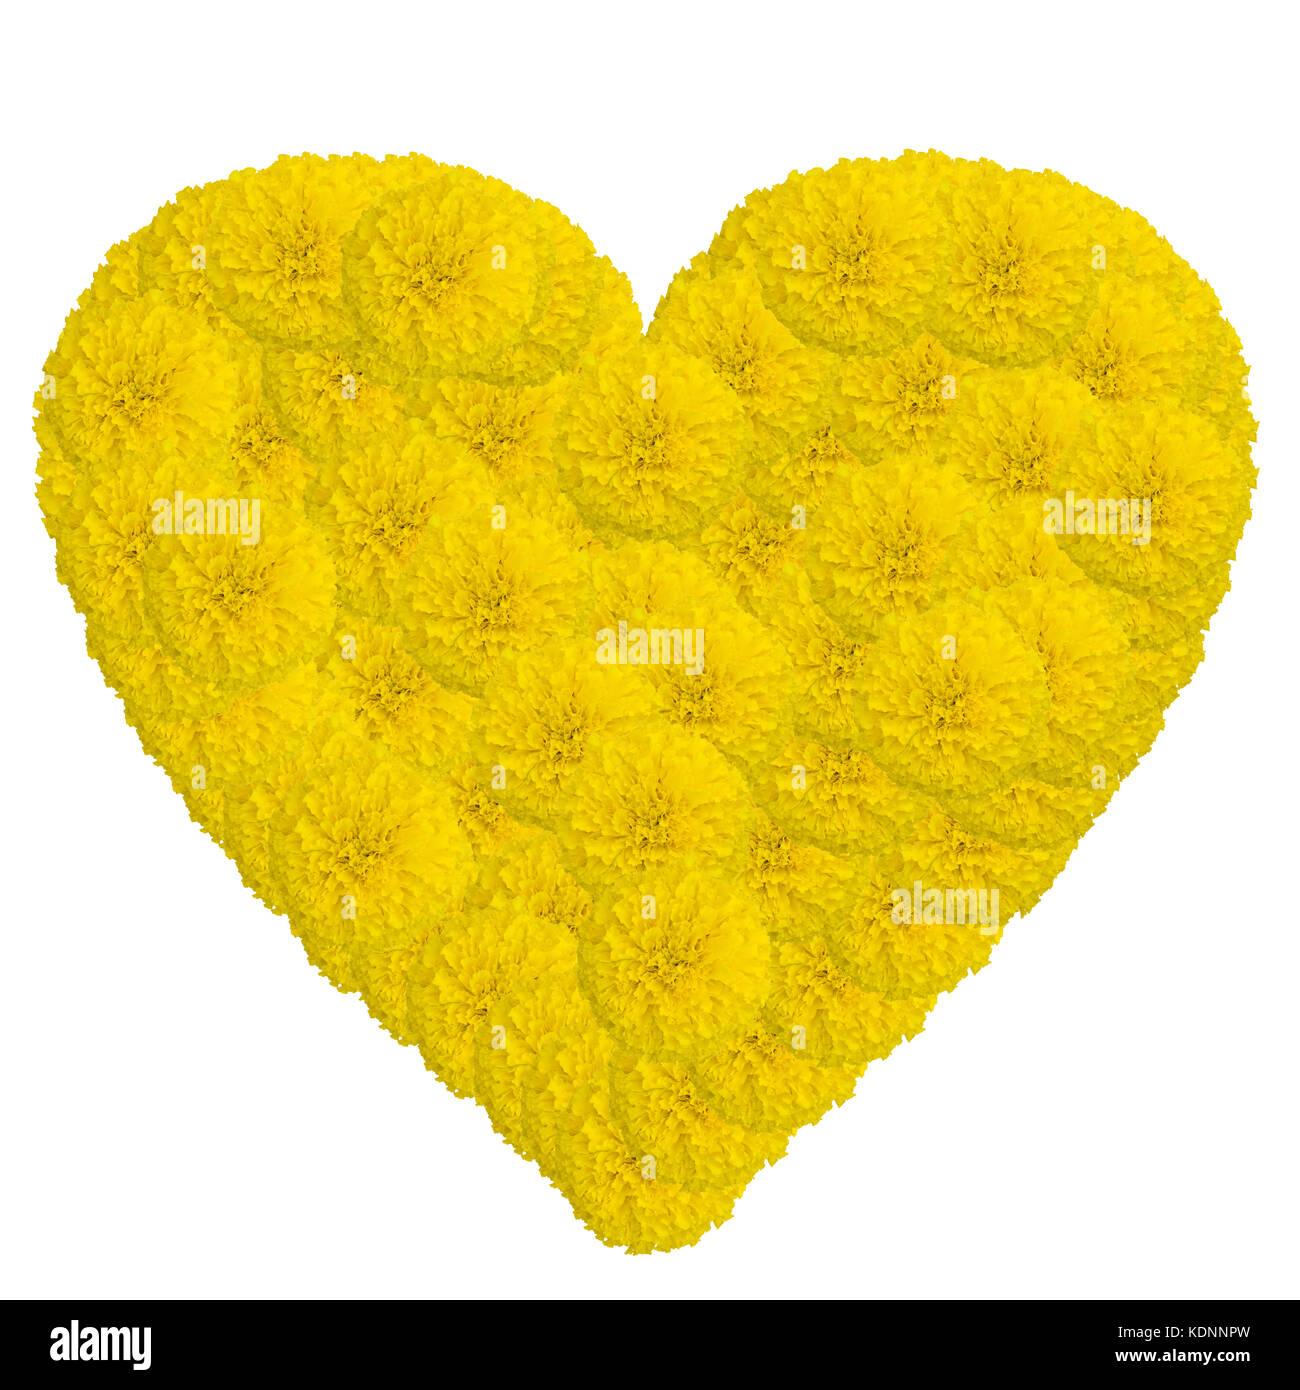 Heart of marigolds flower isolated on white background with clipping path, Tagetes erecta L. flower Stock Photo